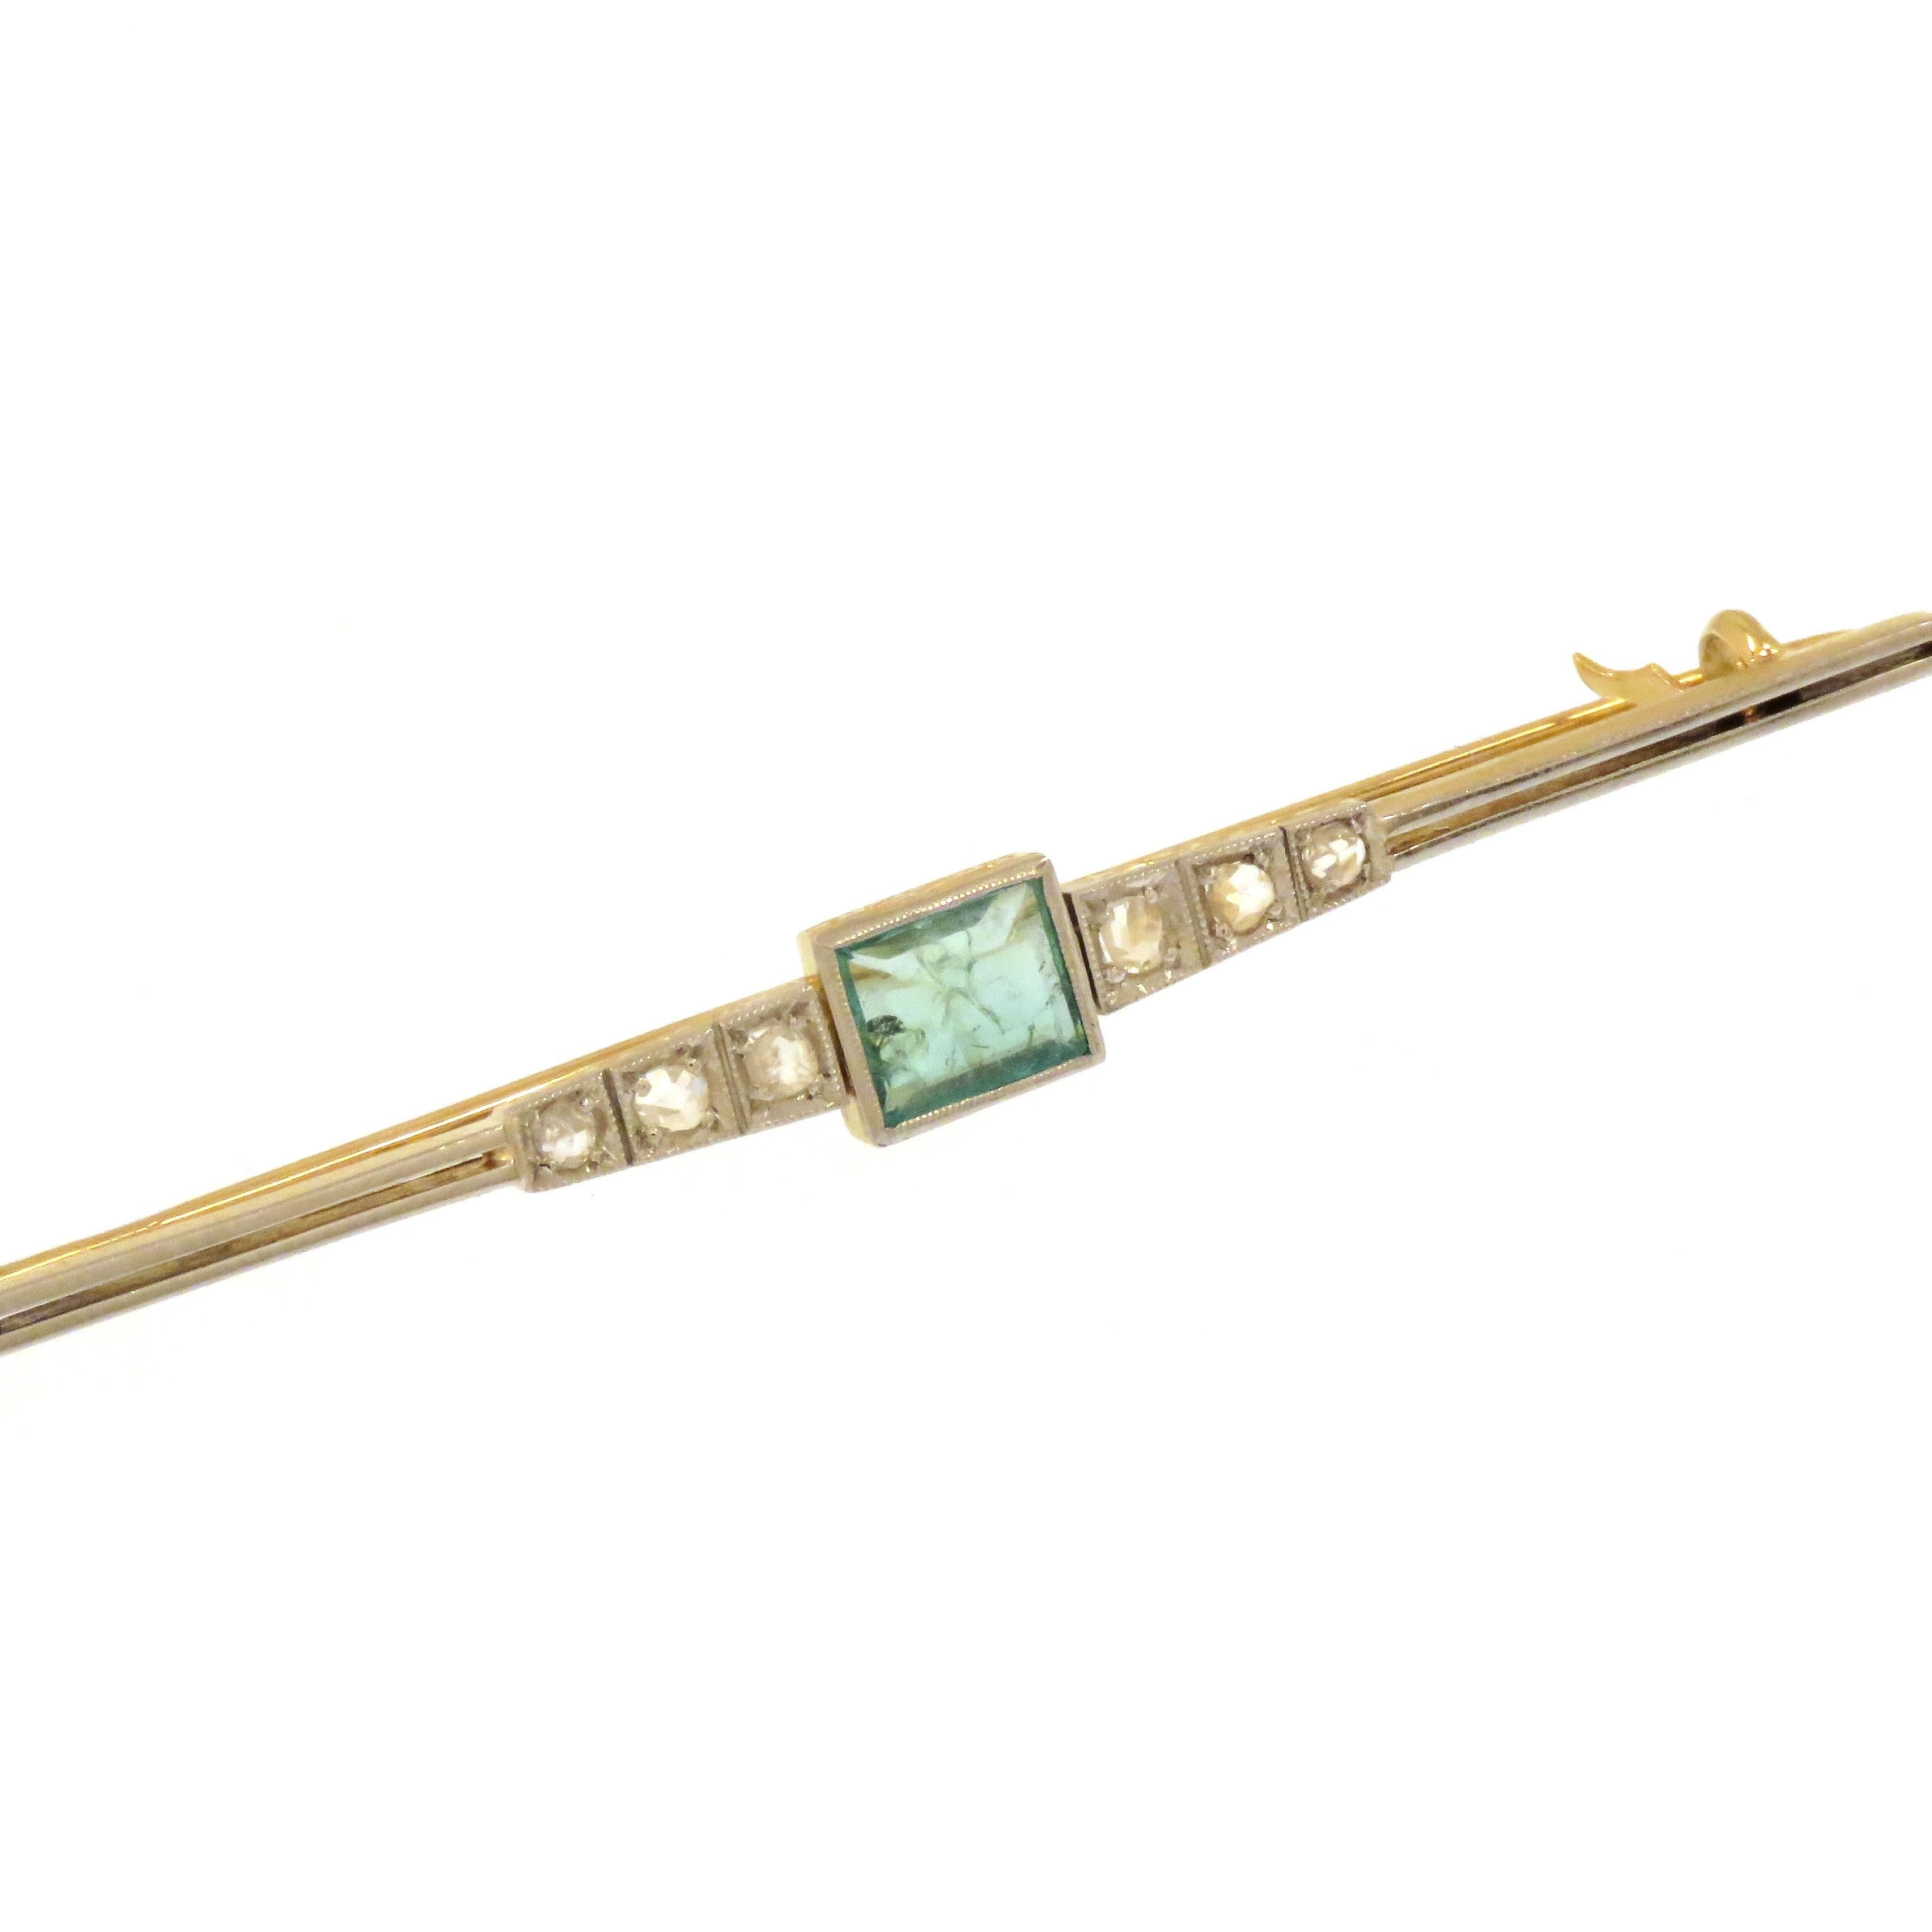 Elegant vintage brooch dating back to the 1940s crafted in 18 karat yellow and white gold. It features 6 rose-cut white diamonds and one green emerald. The size of the brooch is 68X6 mm / 2.667x0.236 inches. Marked with the Gold Mark